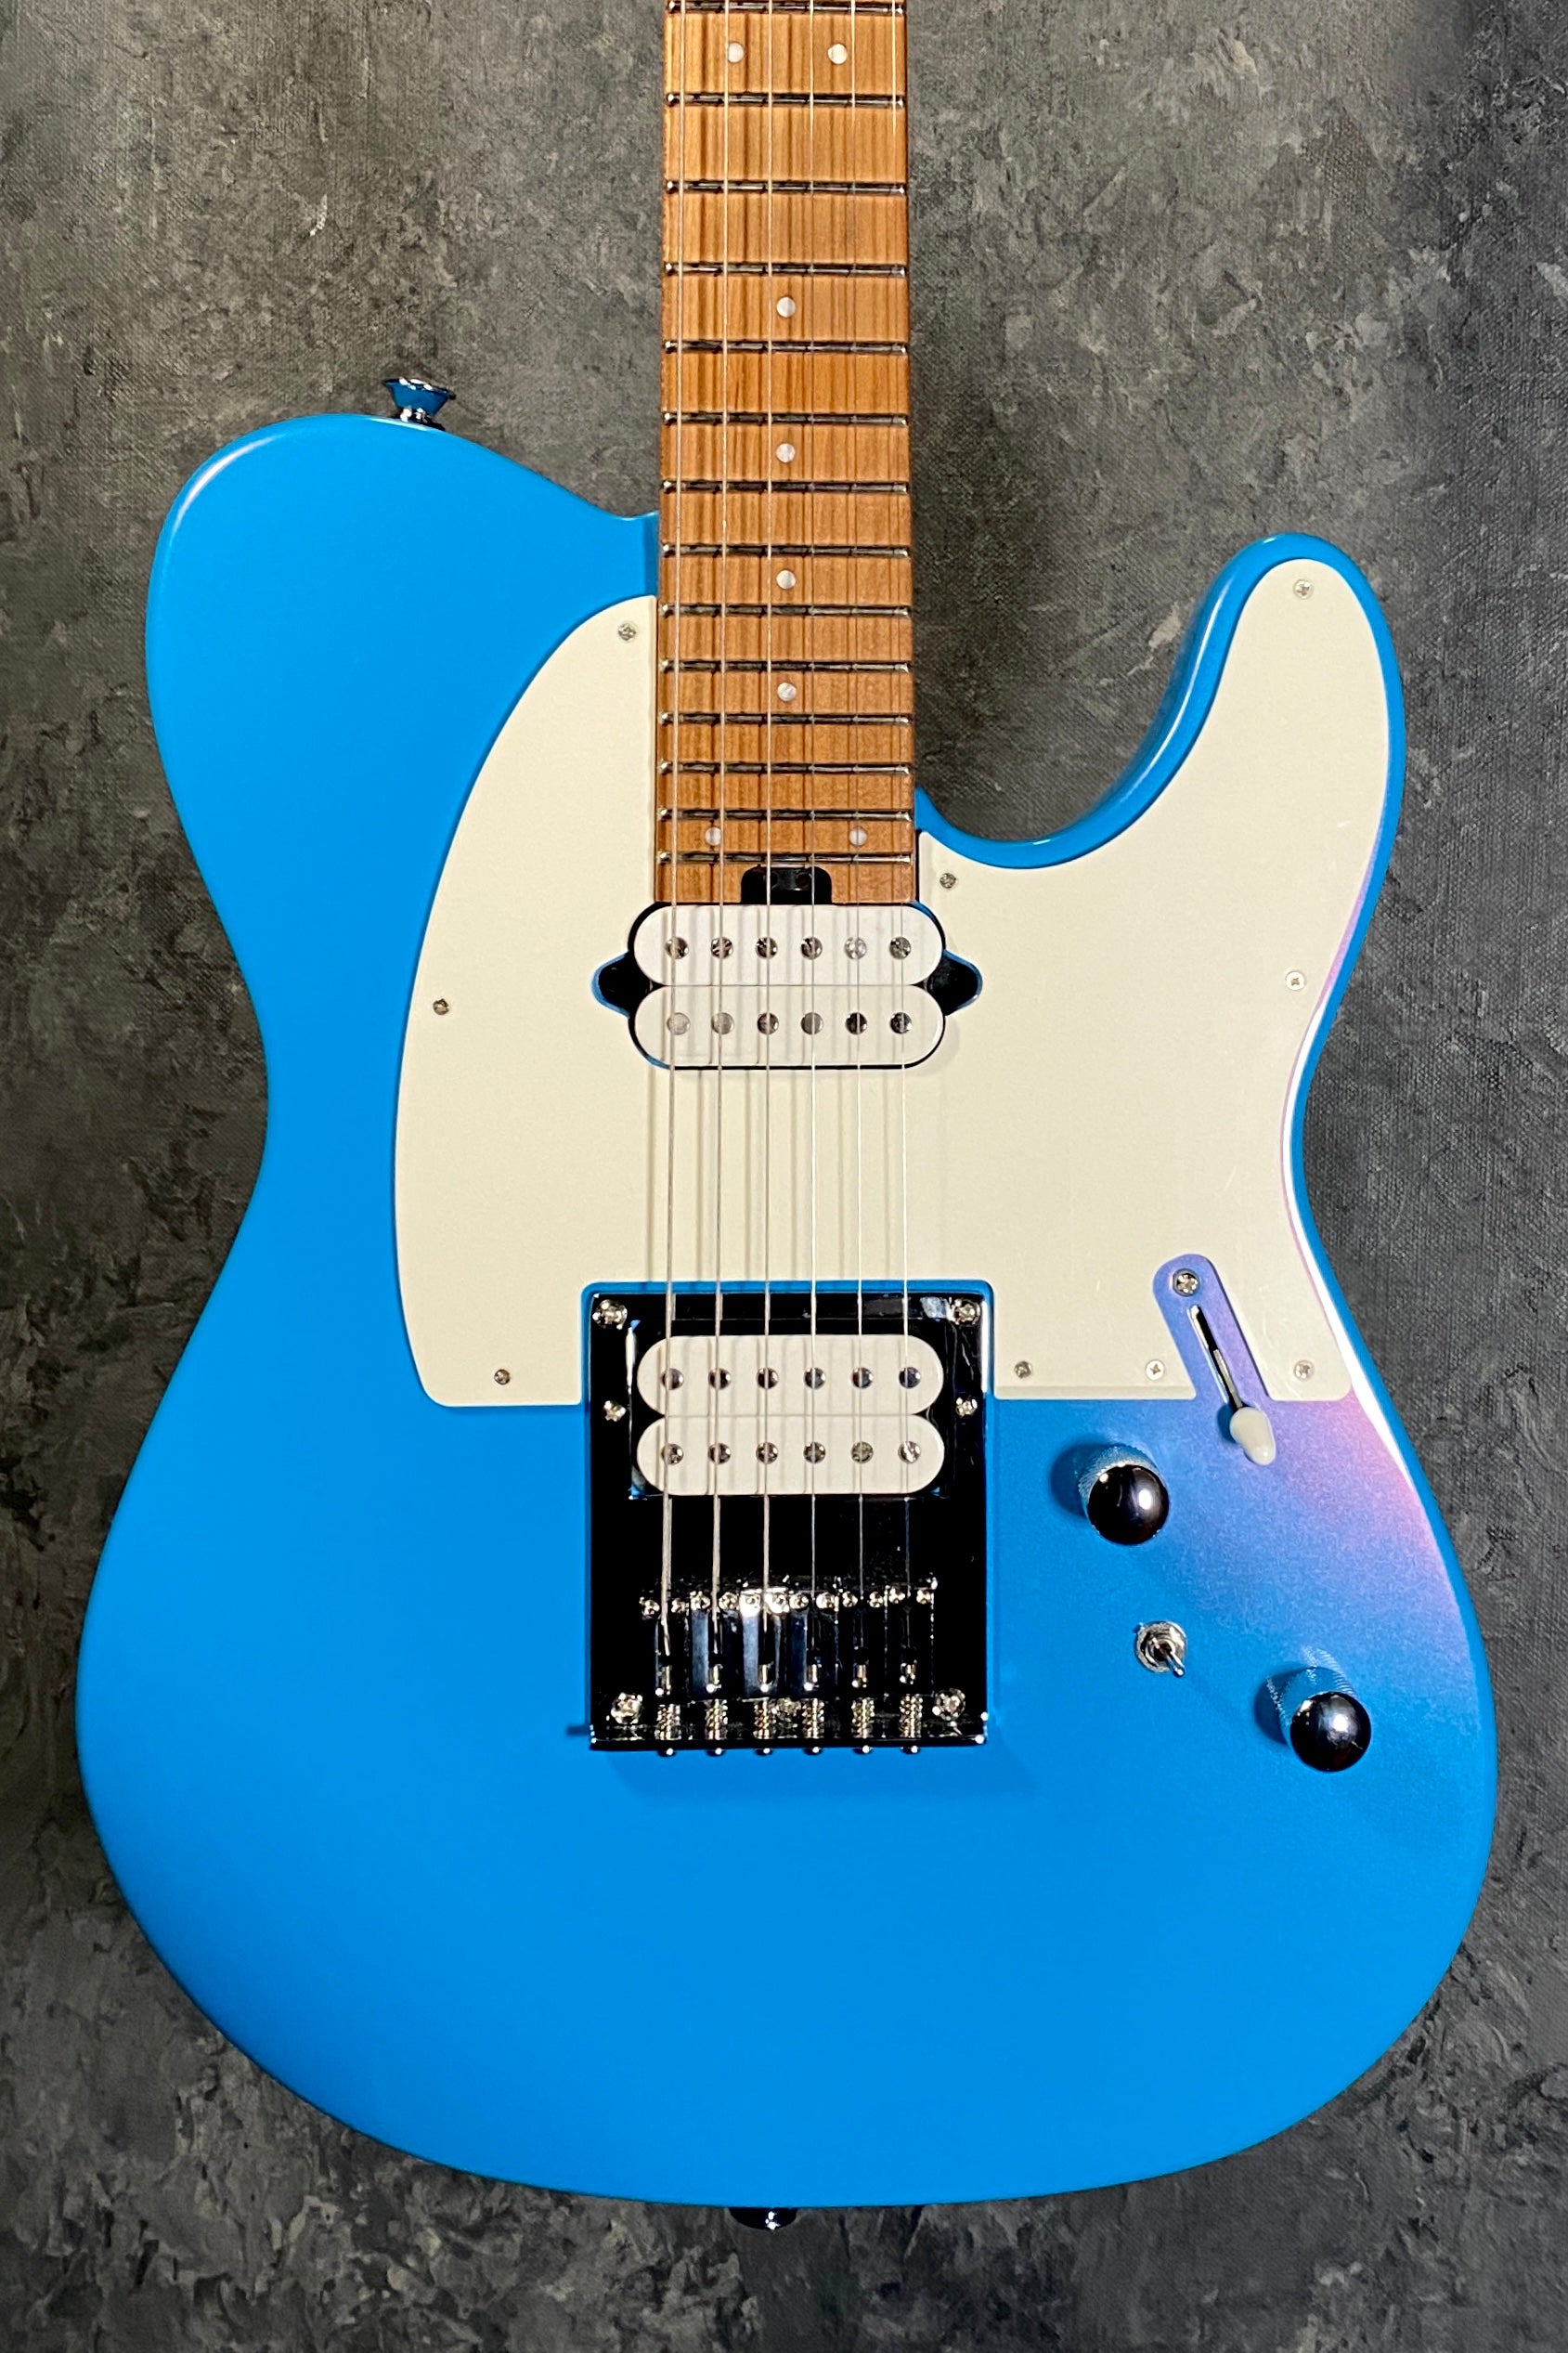 Charvel Pro-Mod So-Cal Style 2 24 HH HT CM in Robin's Egg Blue 2966561527